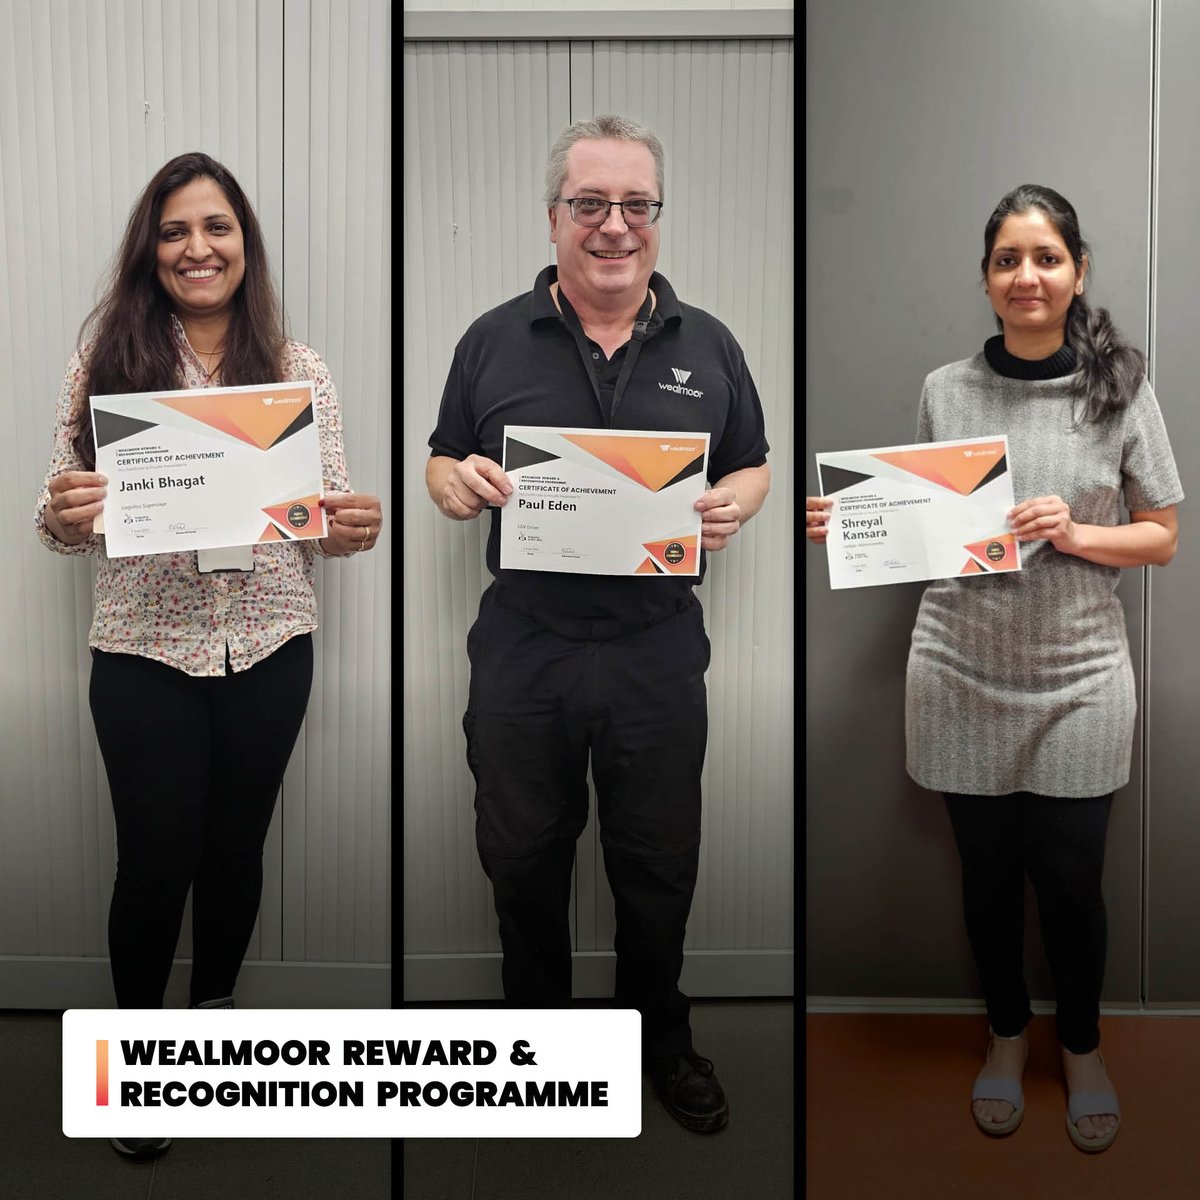 Many congratulations to Janki, Paul and Sheryal who have all received a Reward and Recognition certificate for their empathetic nature and win-win attitude. #wealmoor #thewealmoorway #reward #recognition #award #empathy #entrepreneurialspirit #passion #community #contributions